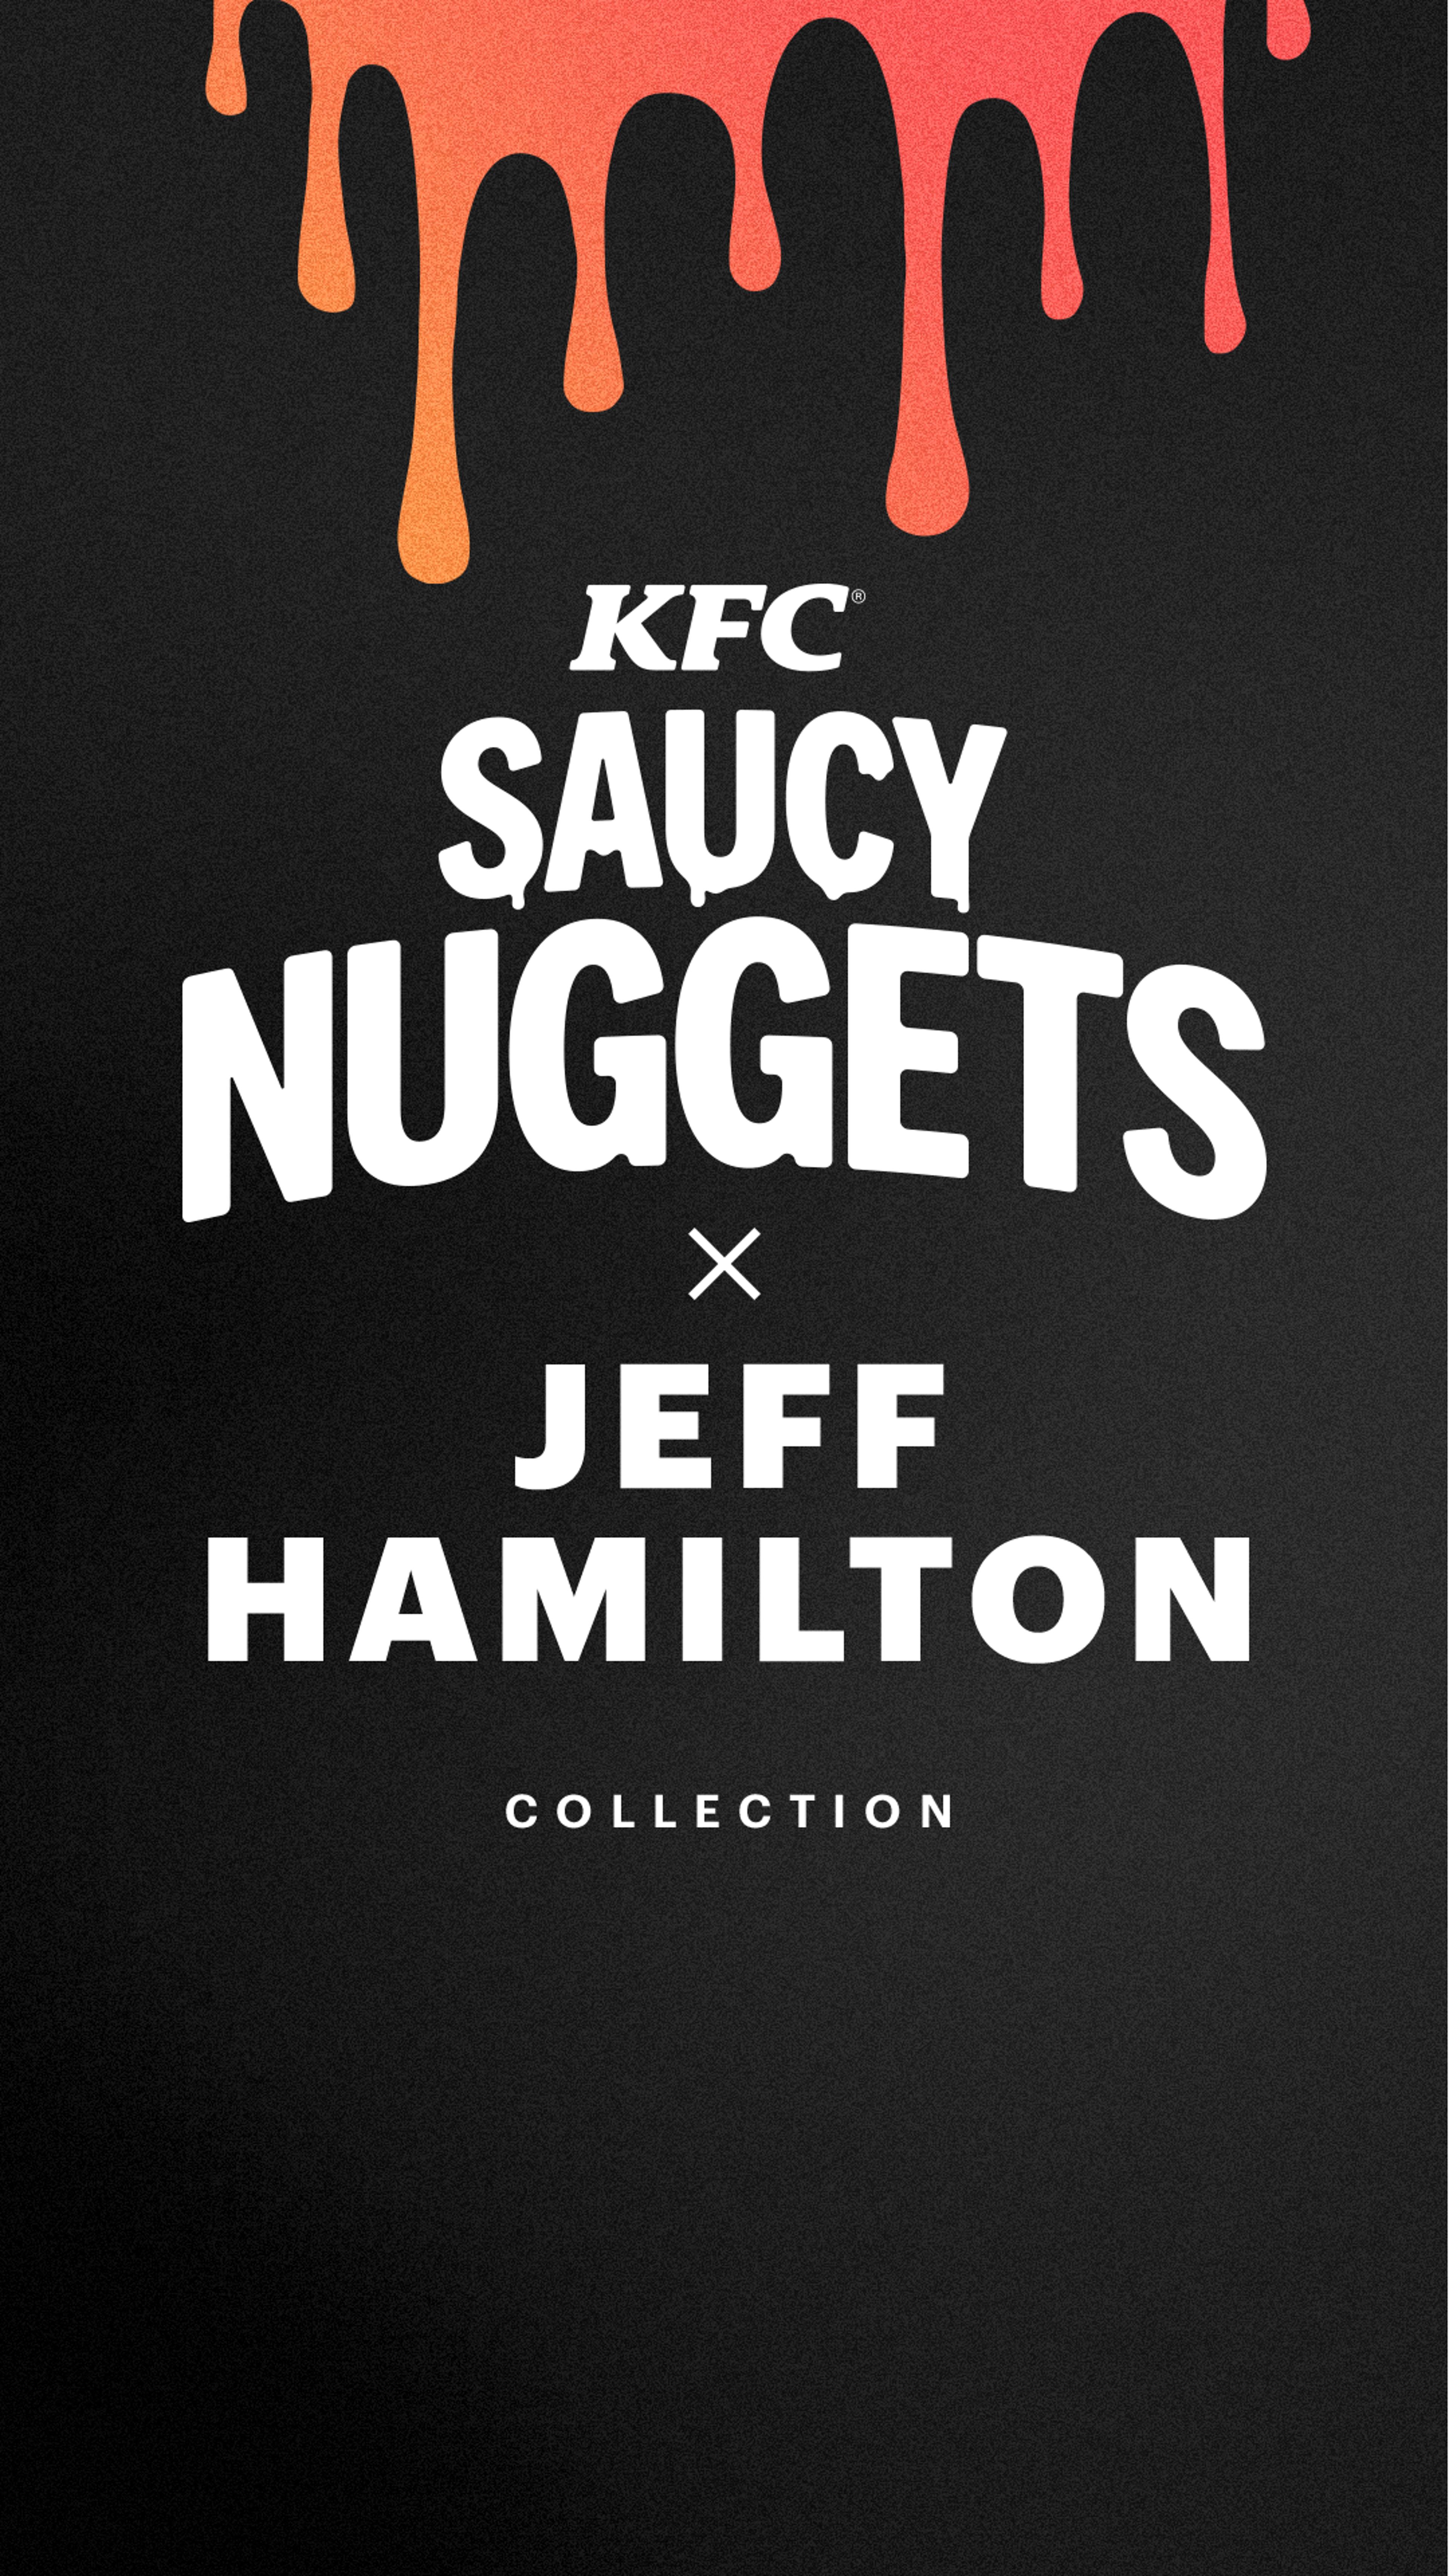 Preview image for the show titled "KFC Saucy Nuggets x Jeff Hamilton" at Wednesday @ 12:00 AM